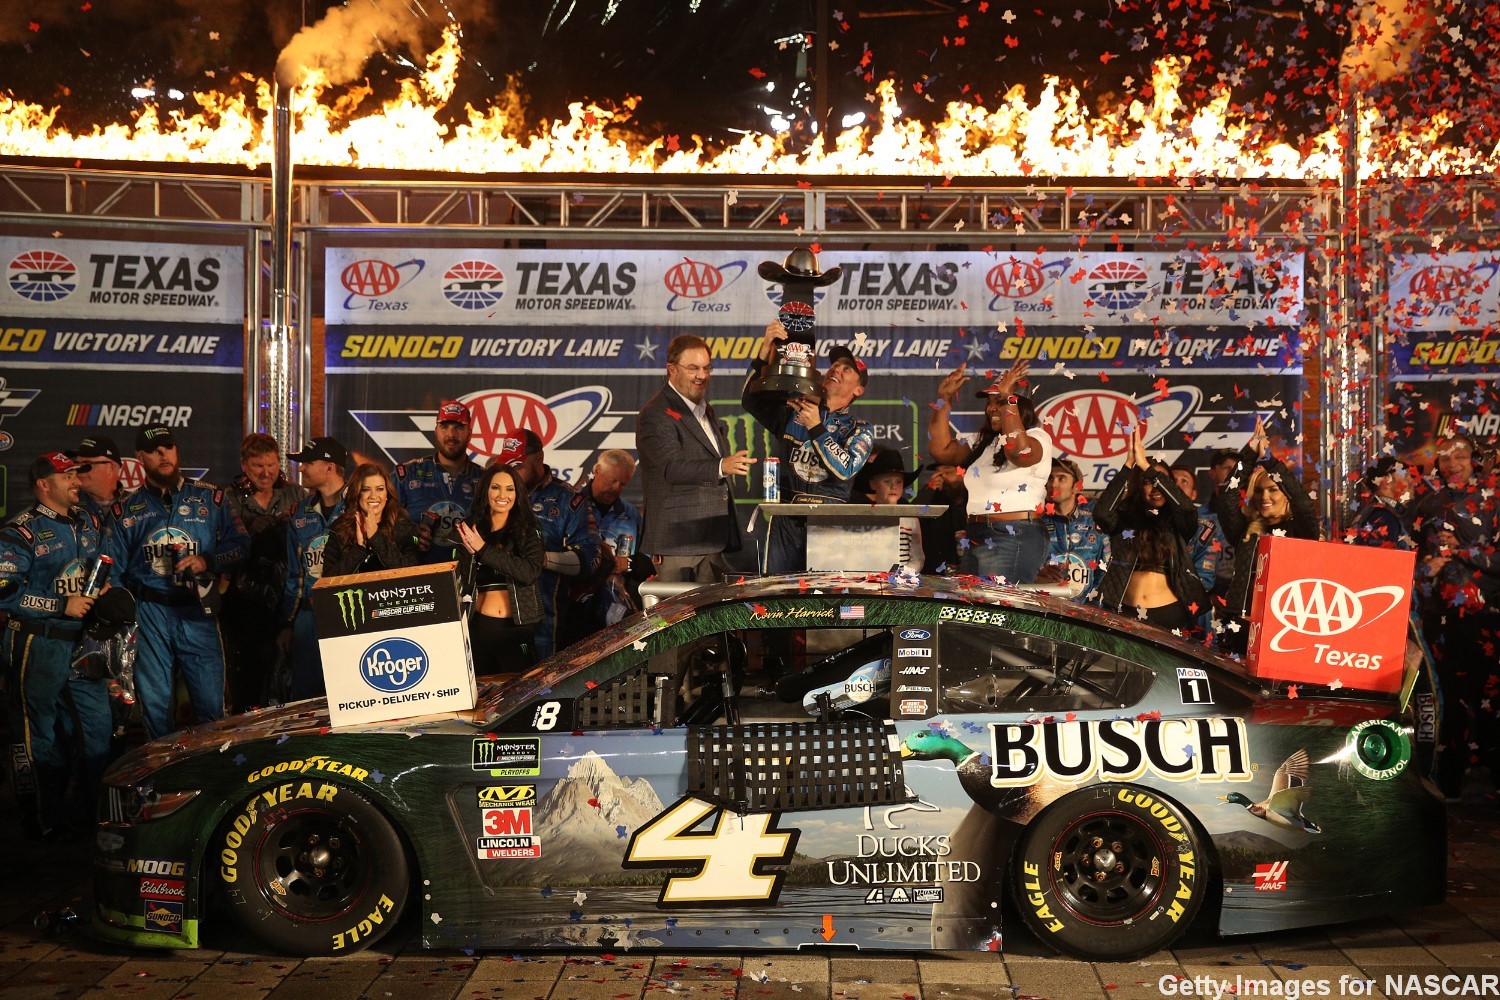 Kevin Harvick, driver of the #4 Busch Beer/Ducks Unlimited Ford, celebrates in Victory Lane after winning the Monster Energy NASCAR Cup Series AAA Texas 500 